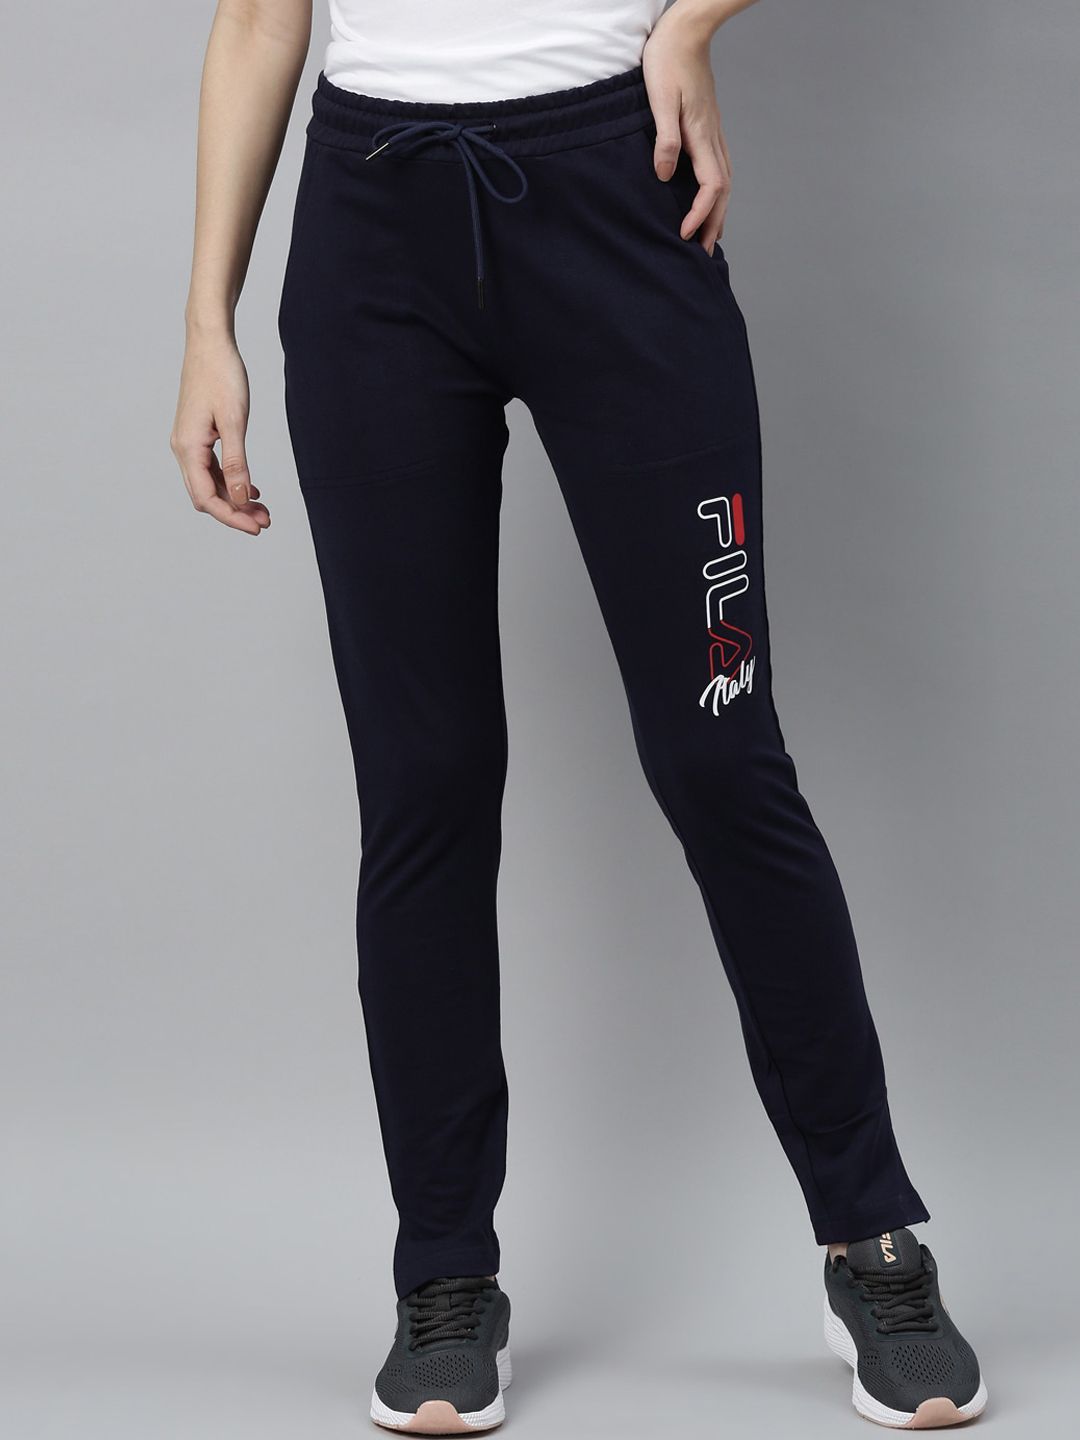 FILA Women Navy Blue Solid Cotton Track Pants Price in India